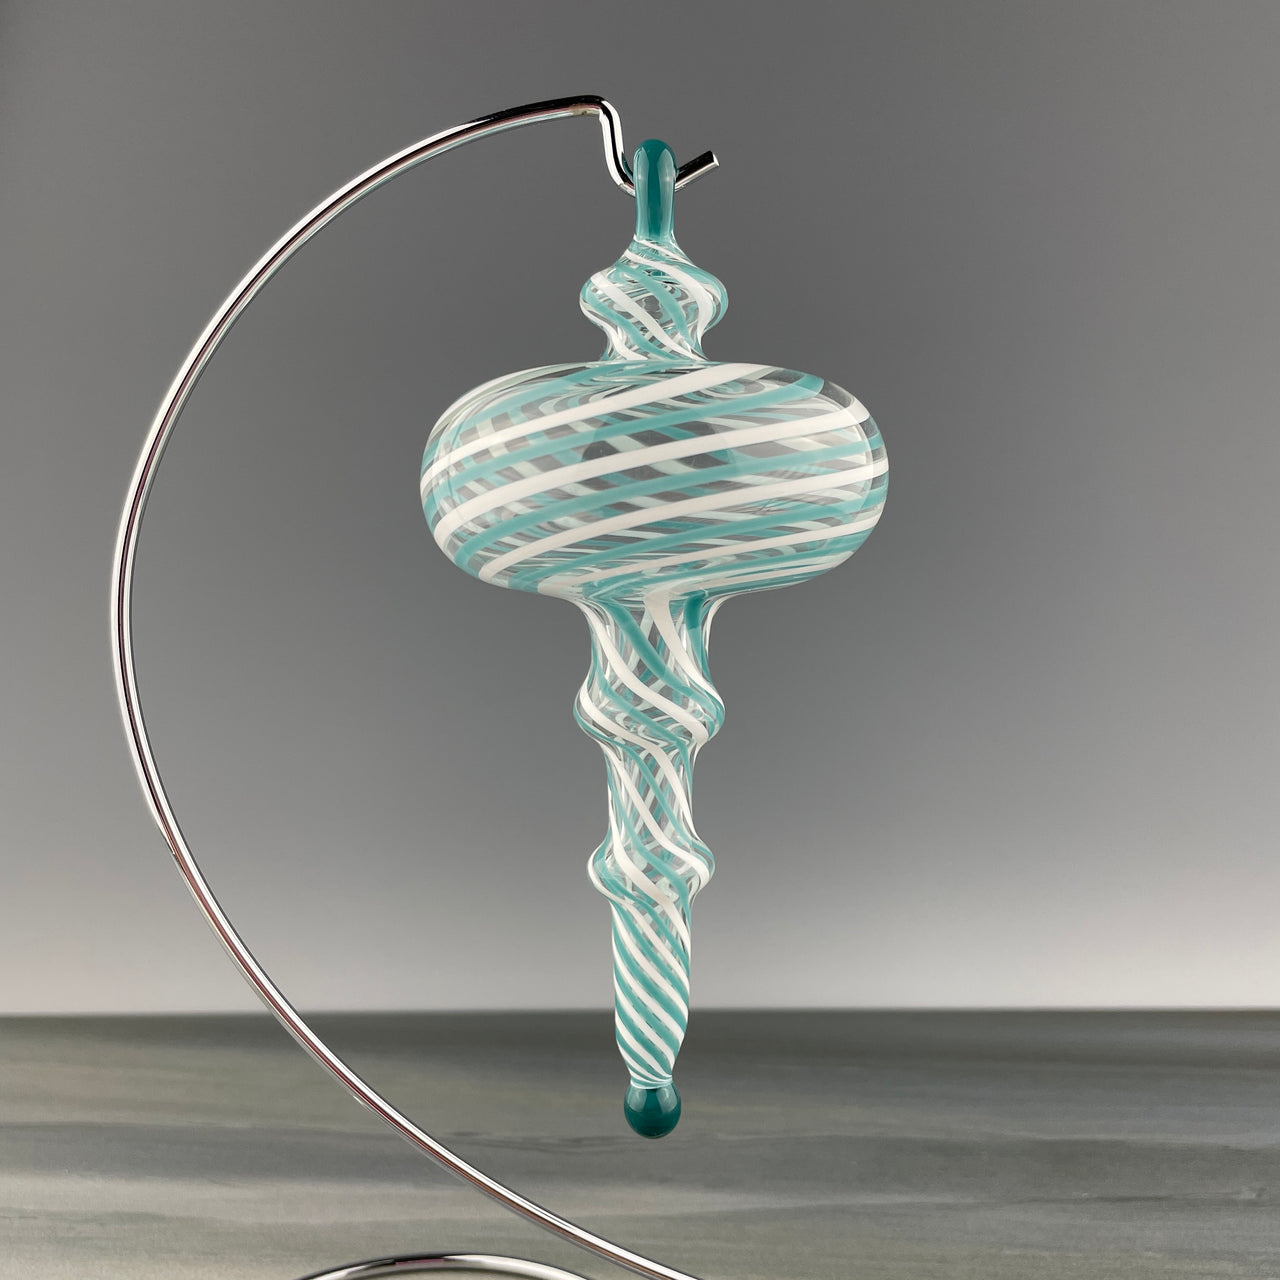 clear glass ornament with a teal and white swirl